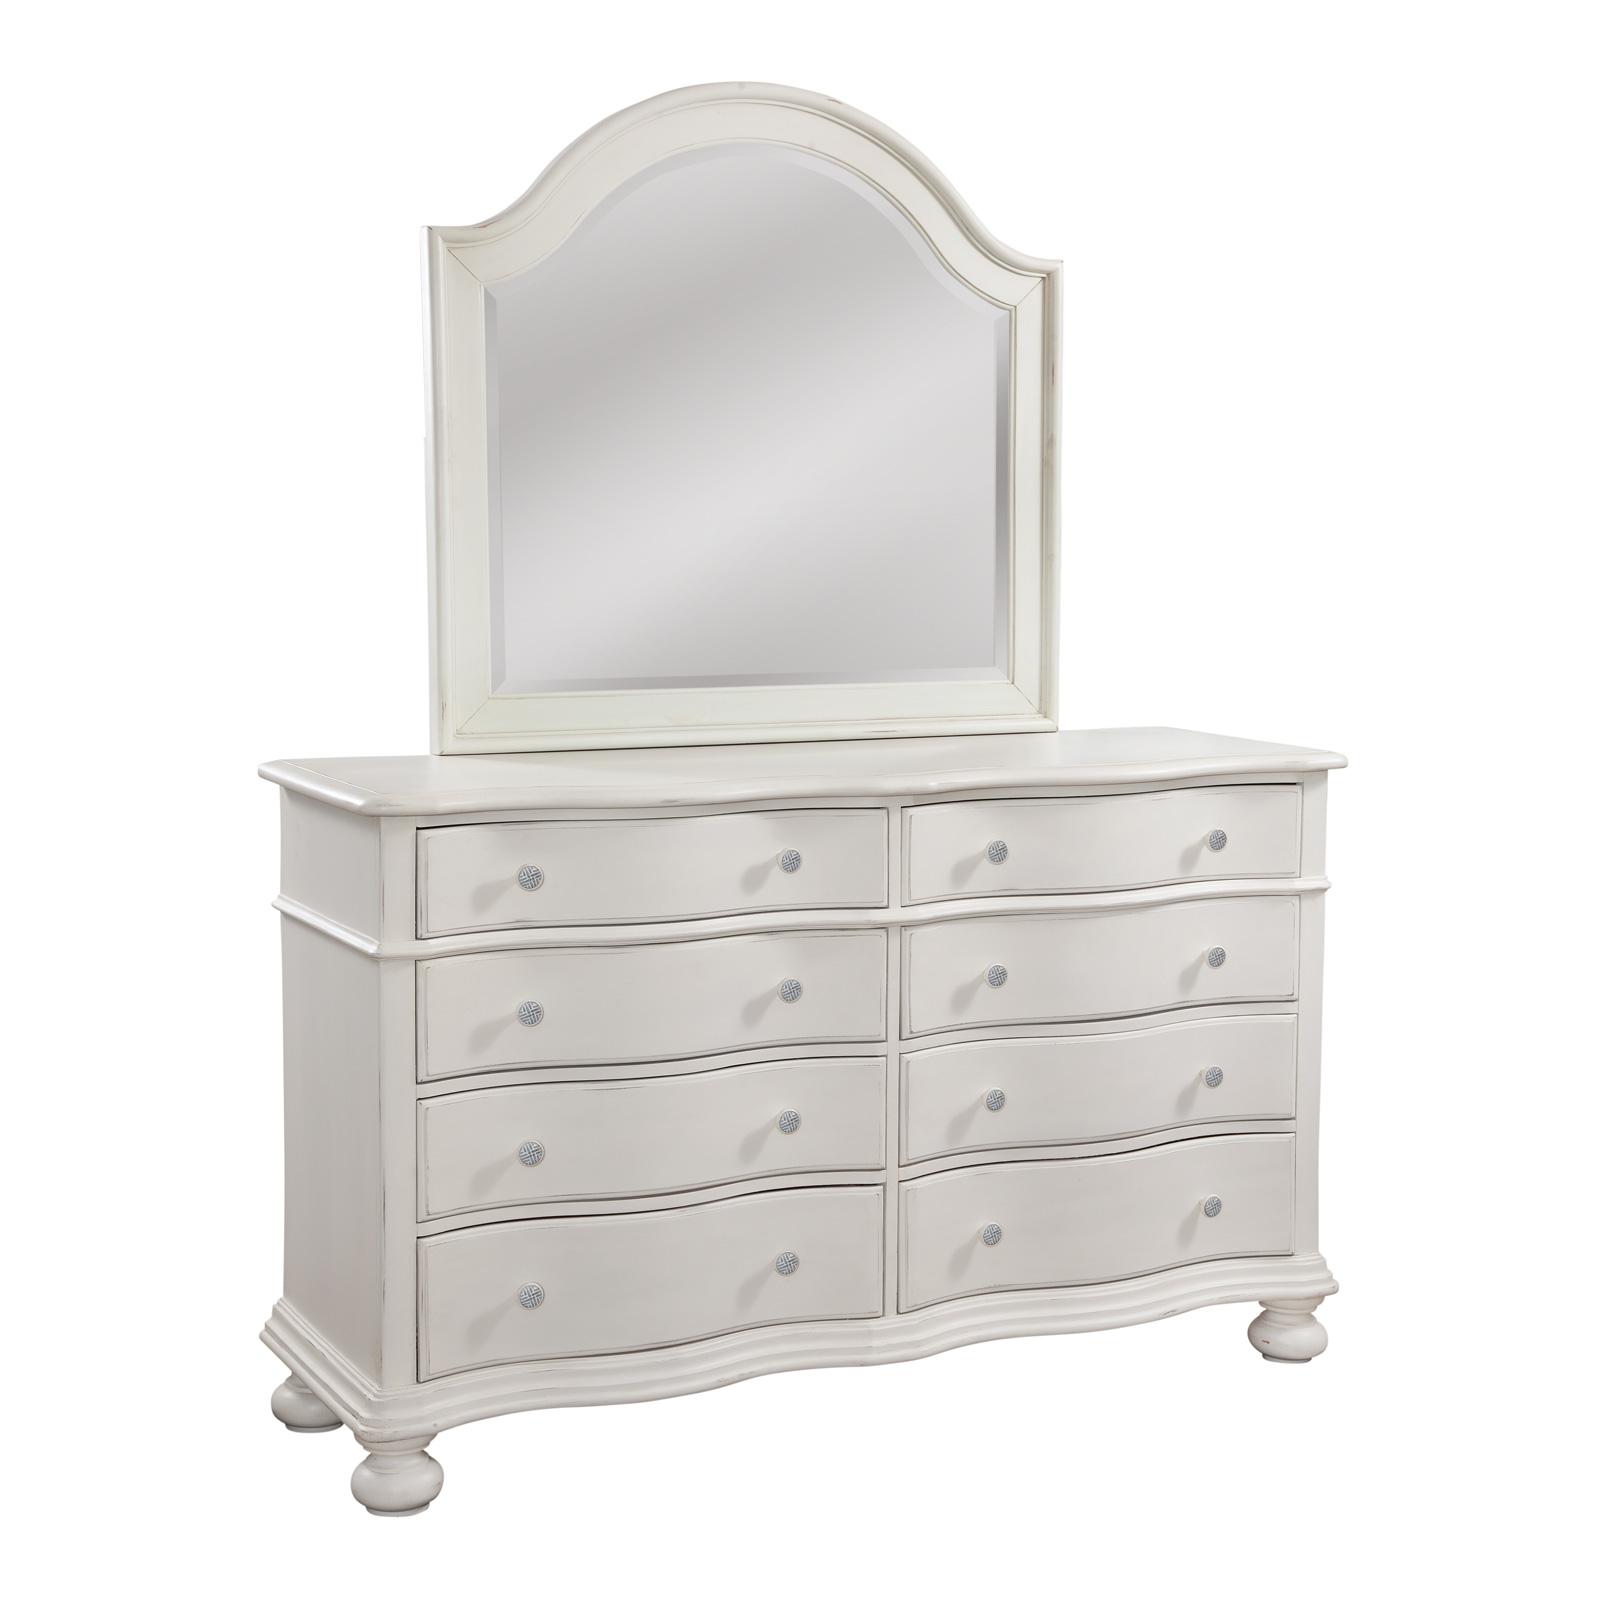 American Woodcrafters Rodanthe 3910-TDLM Dresser With Mirror